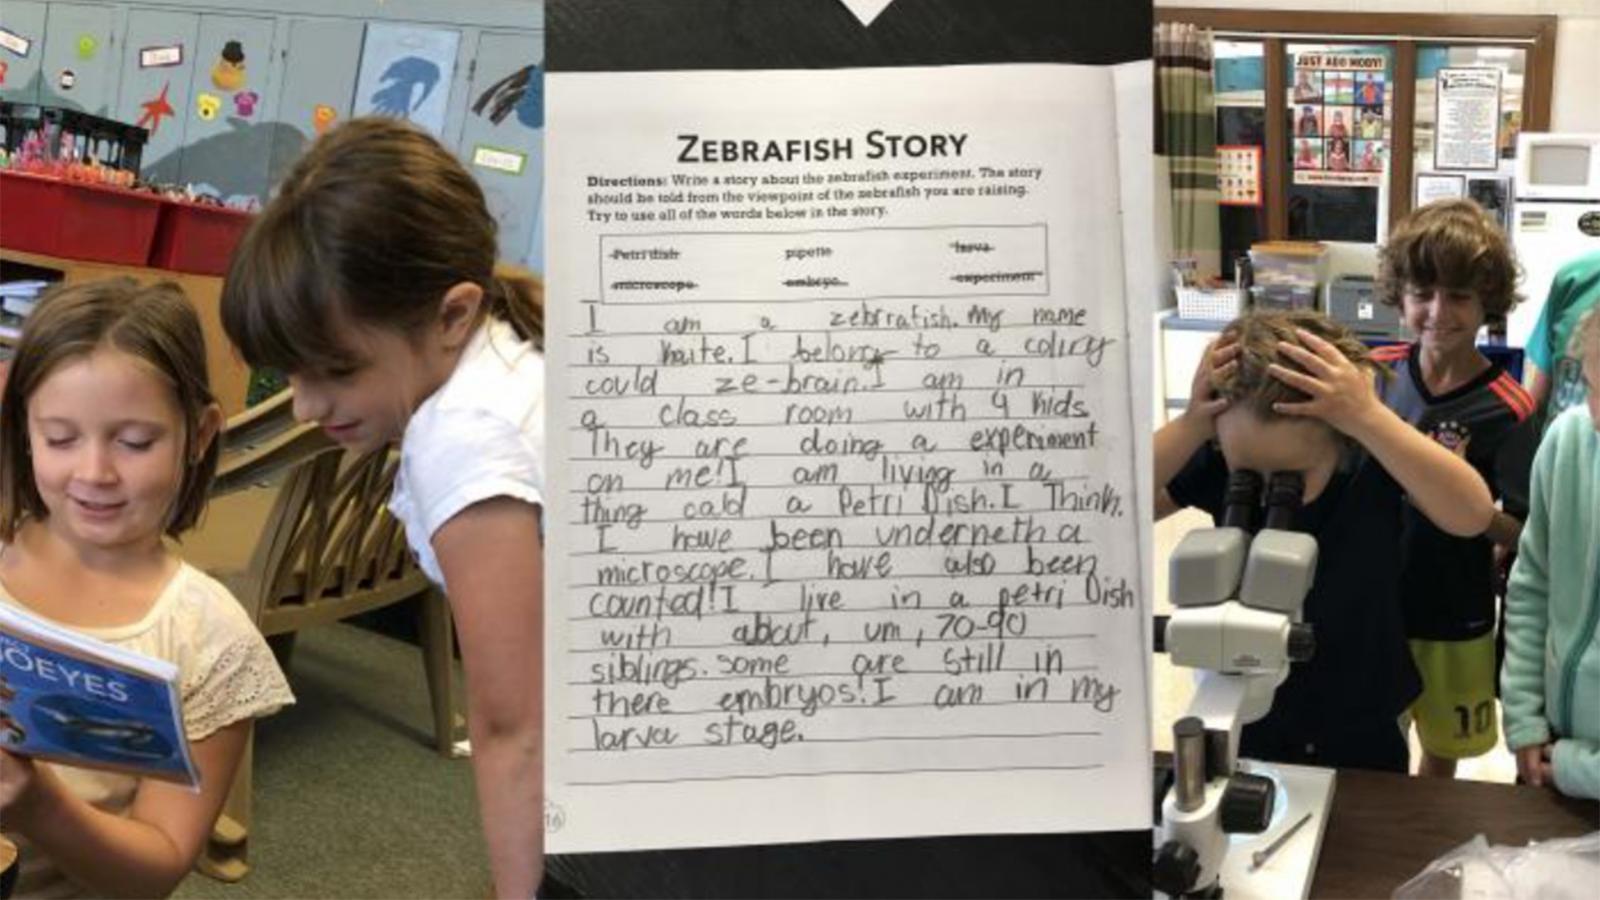 Story about zebrafish written by a student